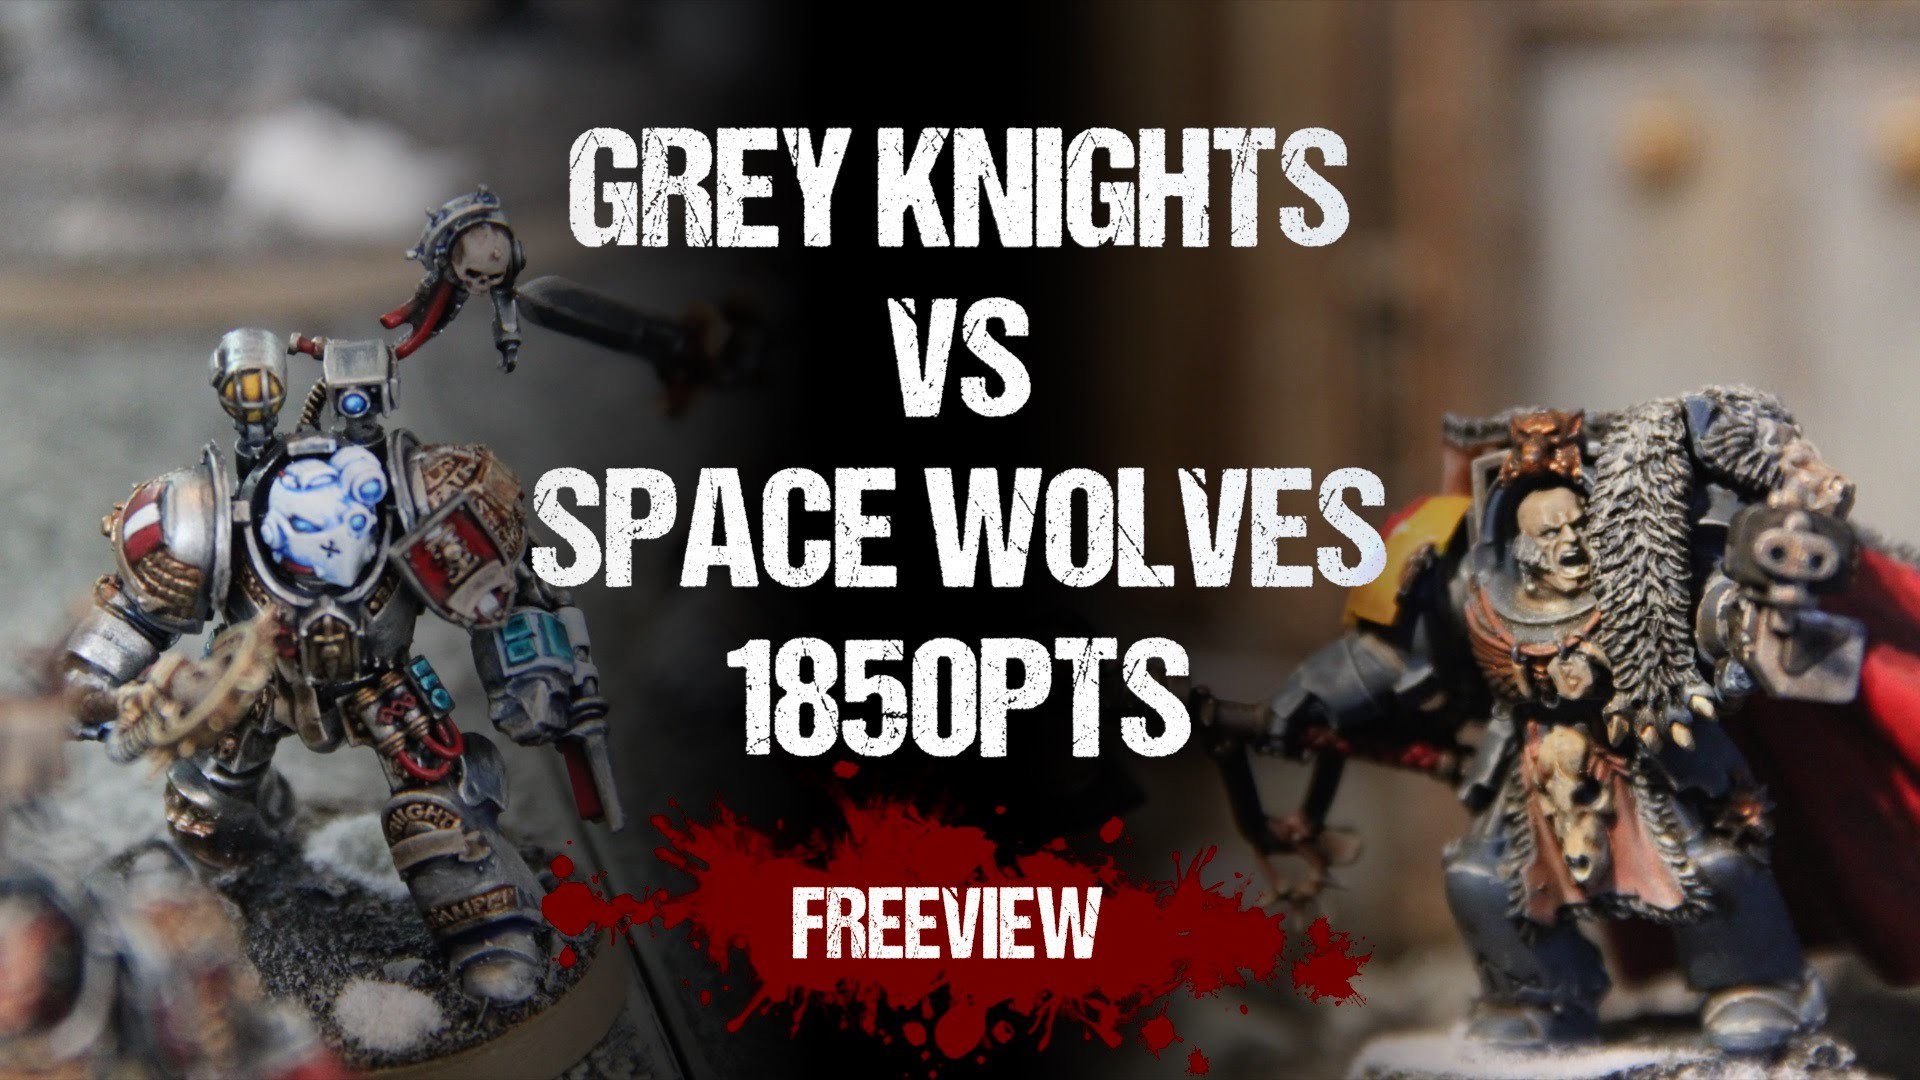 1920x1080 Warhammer 40,000 Battle Report: Grey Knights vs Space Wolves 1850pts -  YouTube